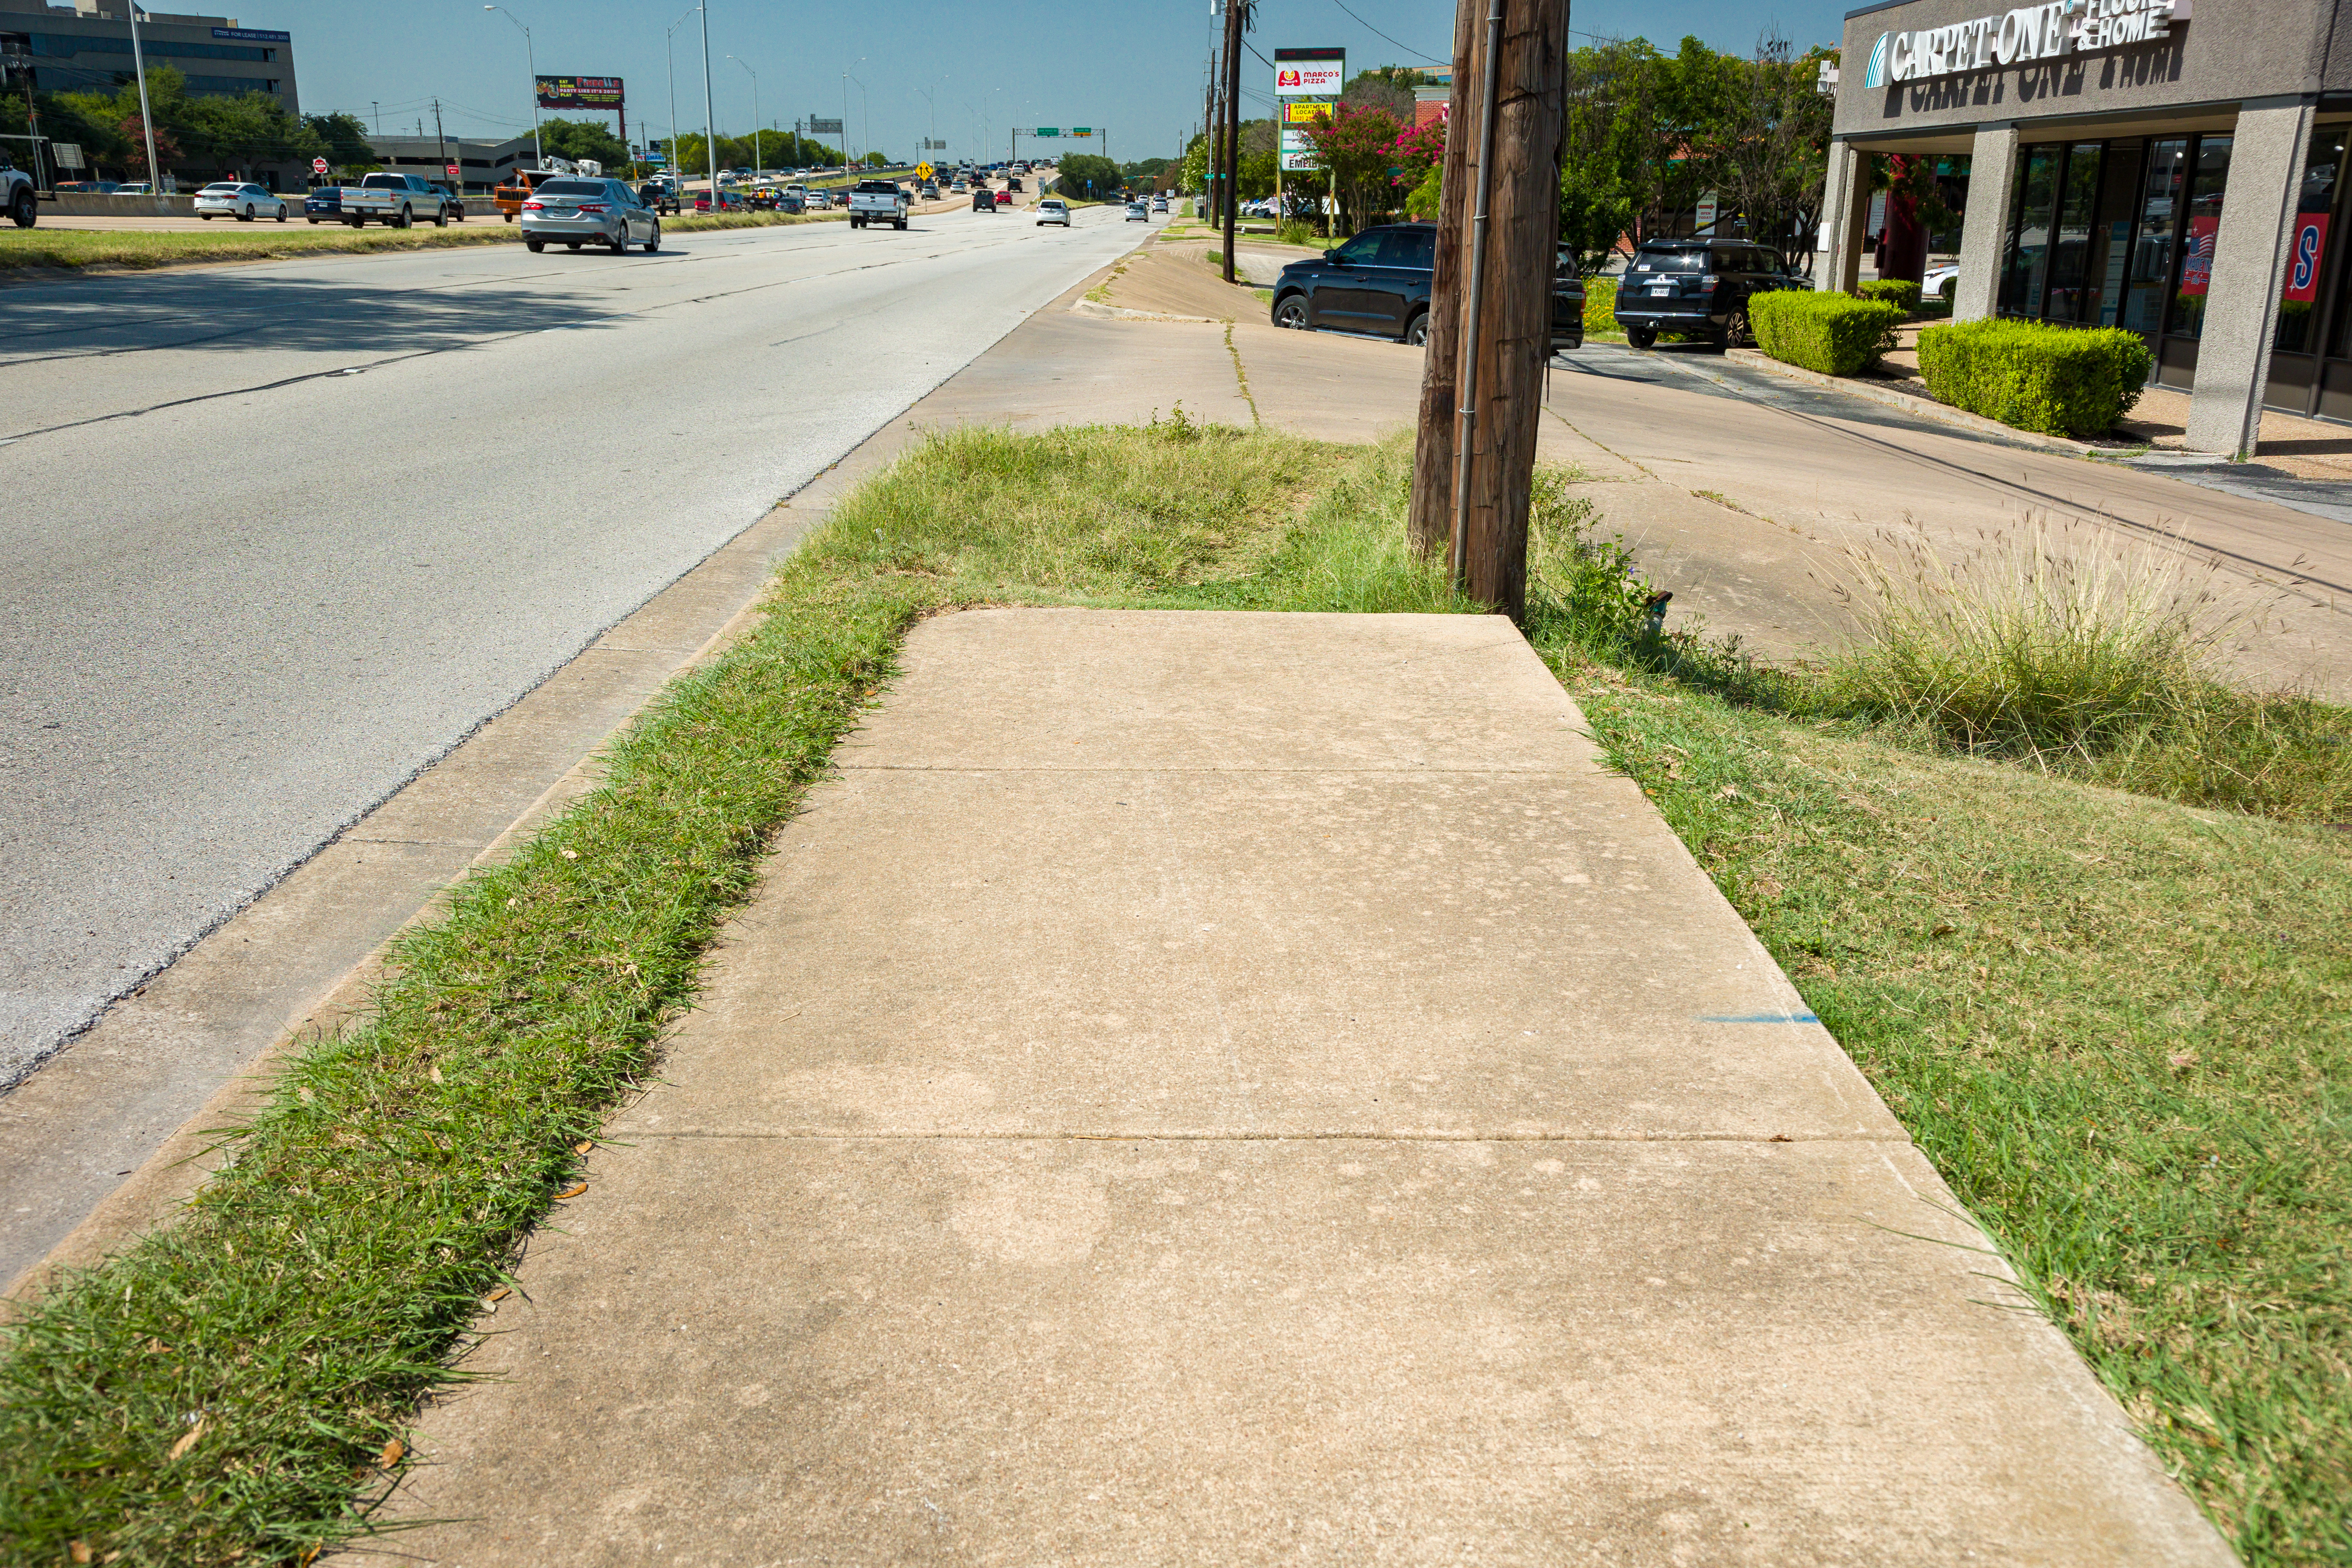 A discontinuous sidewalk and business driveway on the existing US 183 Frontage Roads.